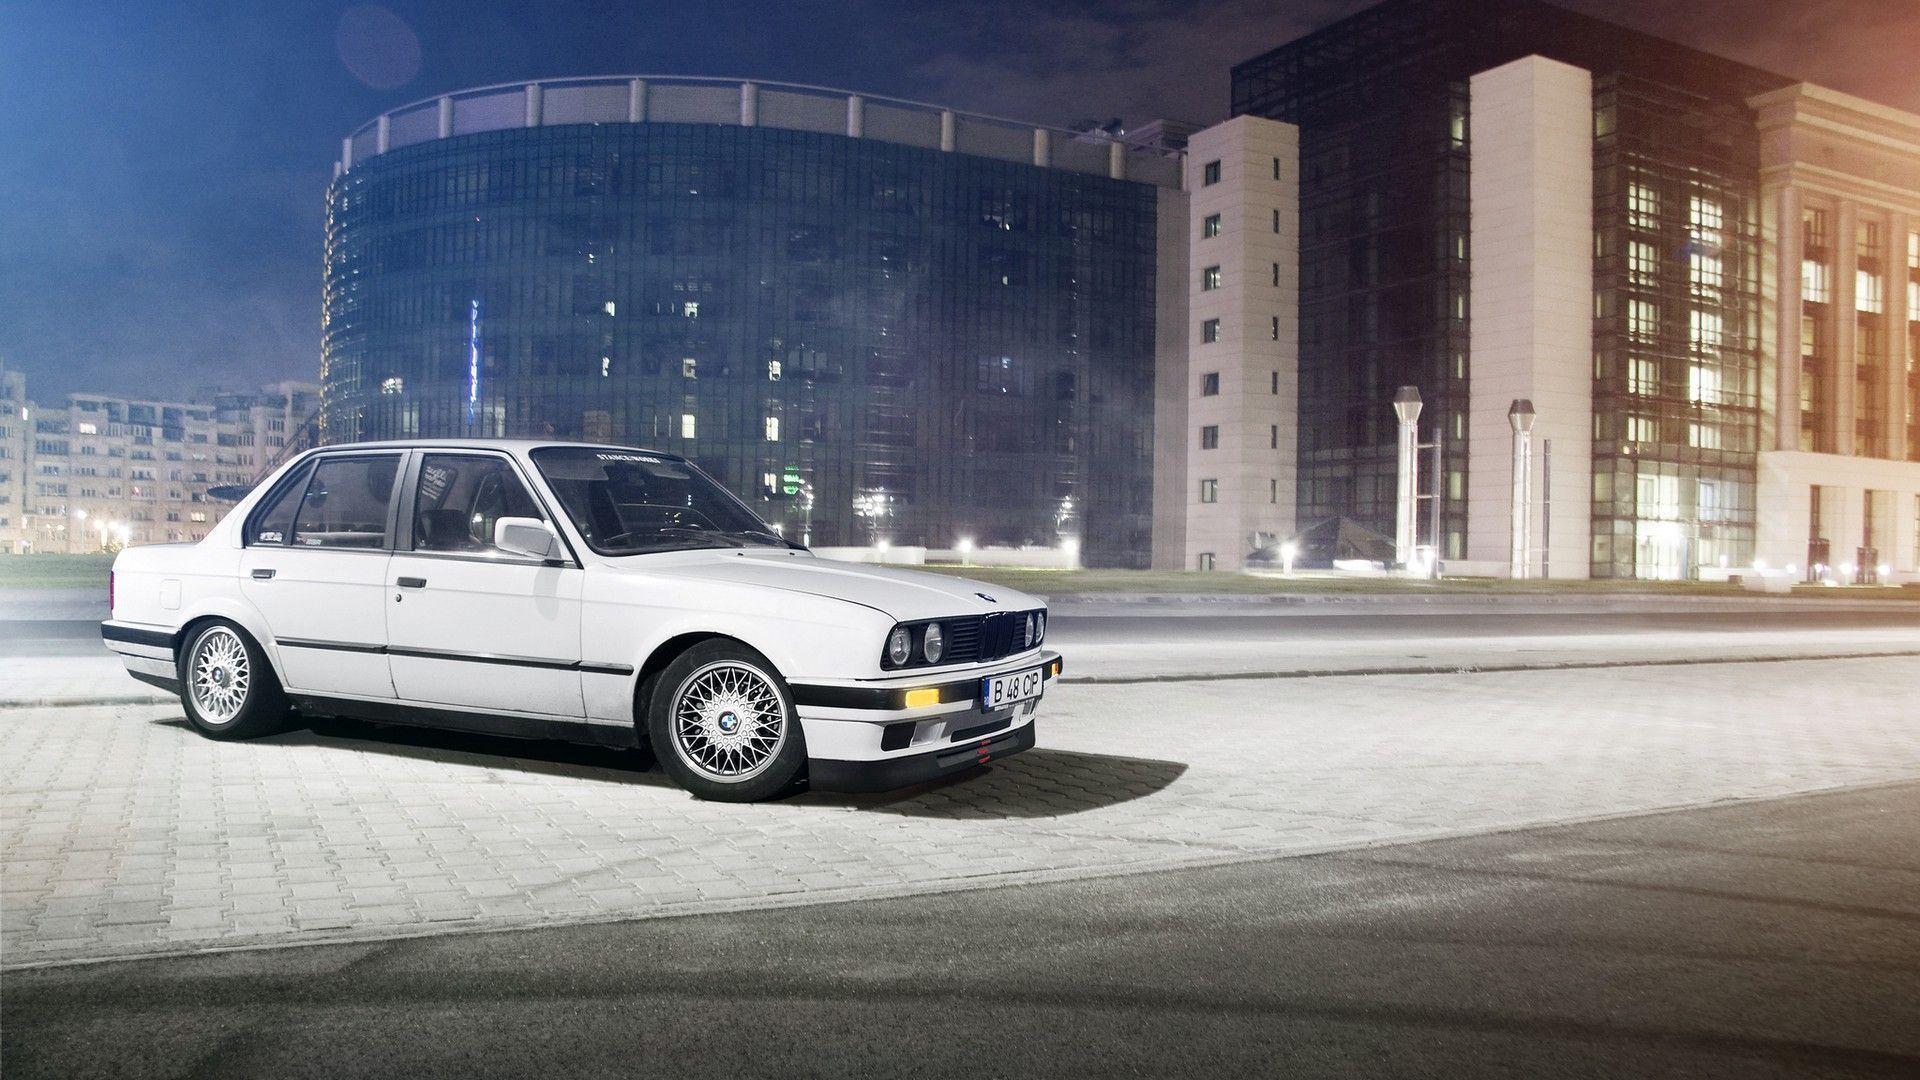 Bmw E30 Wallpaper ID: HYR1717 for mobile and desktop